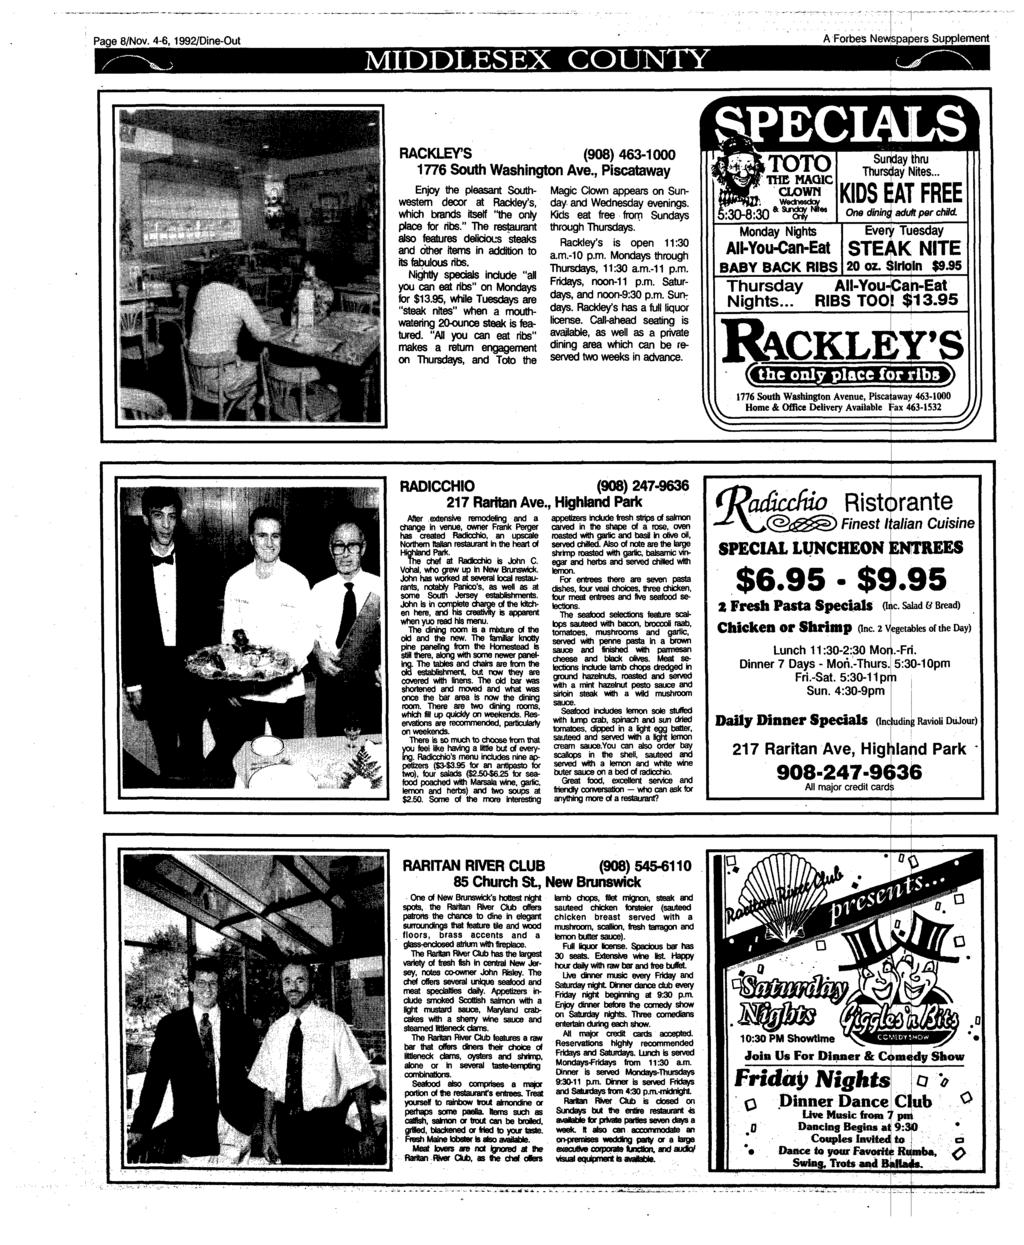 Page 8/Nov. 4-6,1992/Dine-Out MIDDLESEX COUNTY "T A Forbes Newspapers Supplement RACKLEY'S (908)463-1000 1776 South Washington Ave., Piscataway Magic Clown appears on Sun- day and Wednesday evenings.